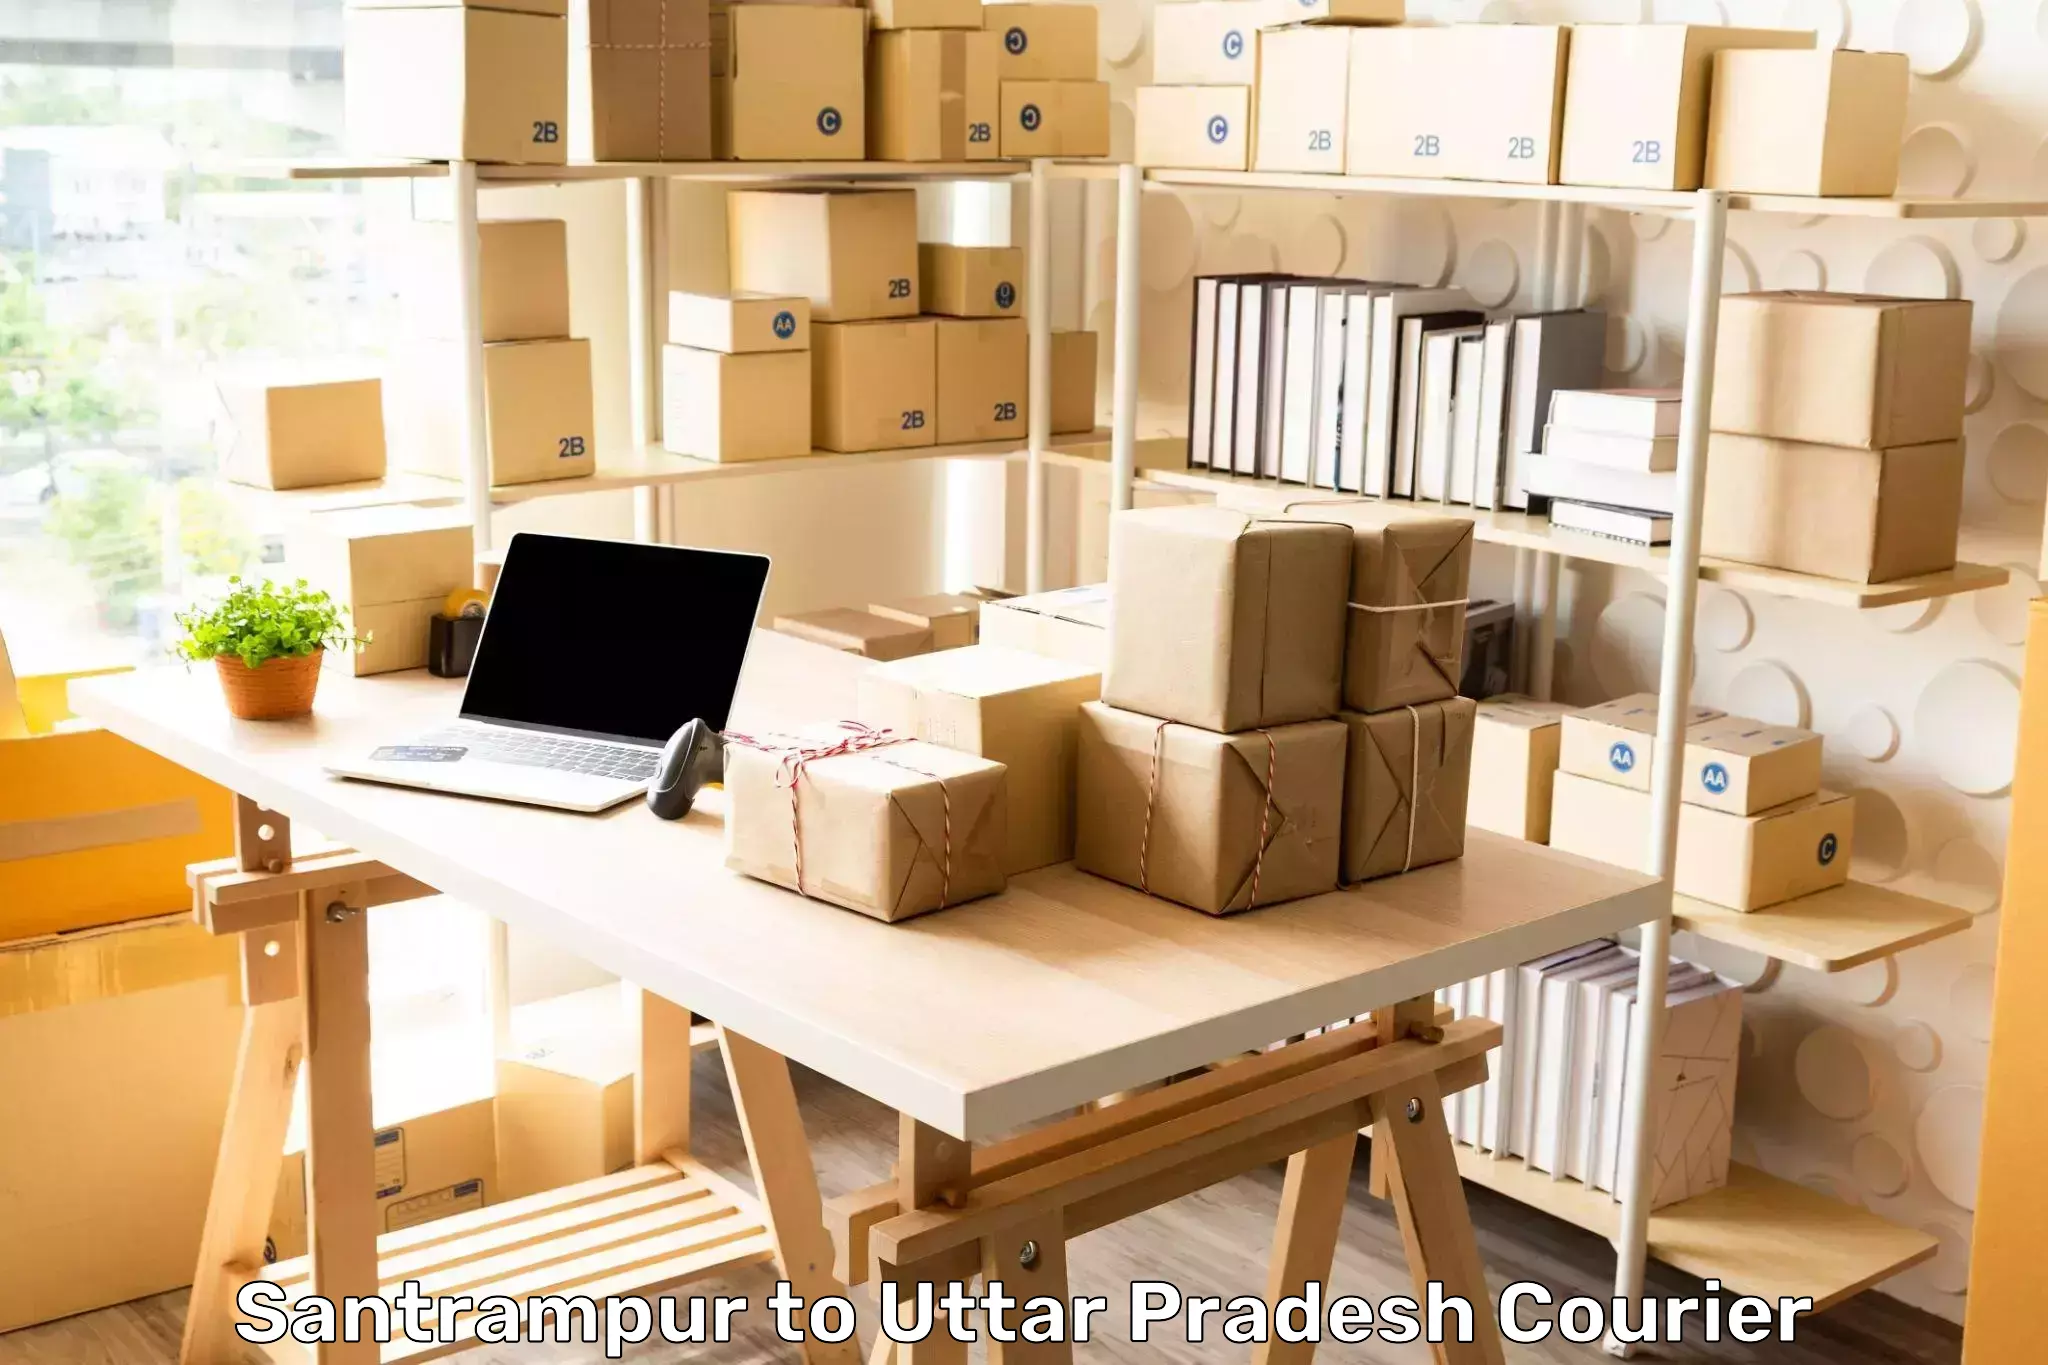 On-call courier service Santrampur to Agra